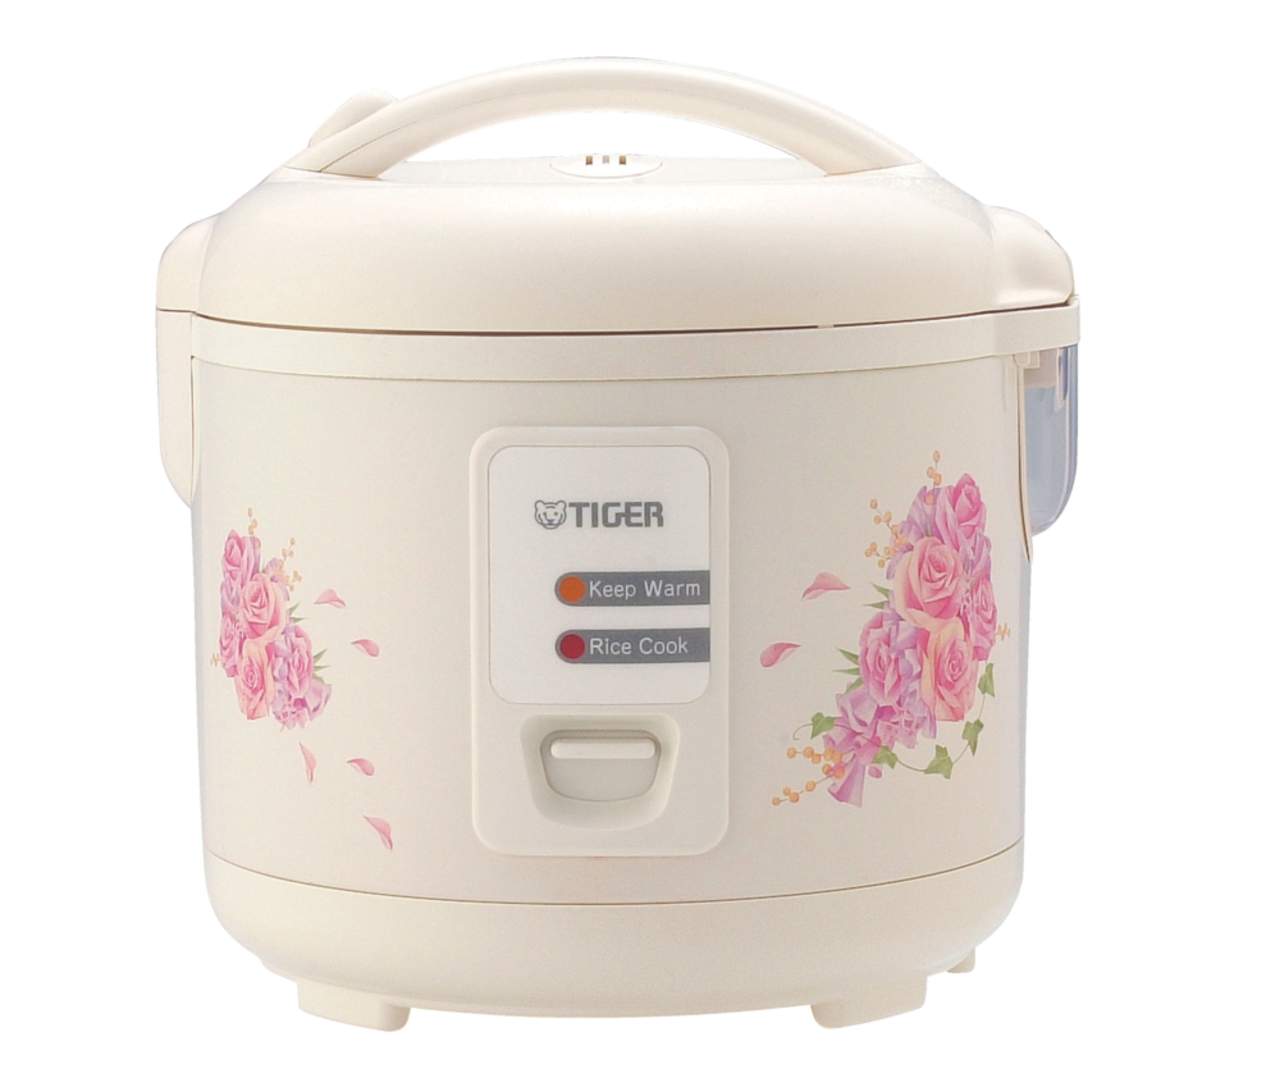 https://media-www.canadiantire.ca/product/living/kitchen/kitchen-appliances/0432657/tiger-5-5-cup-electric-rice-cooker-45d7e272-316b-4fe7-acc5-63d09243dee0.png?imdensity=1&imwidth=640&impolicy=mZoom